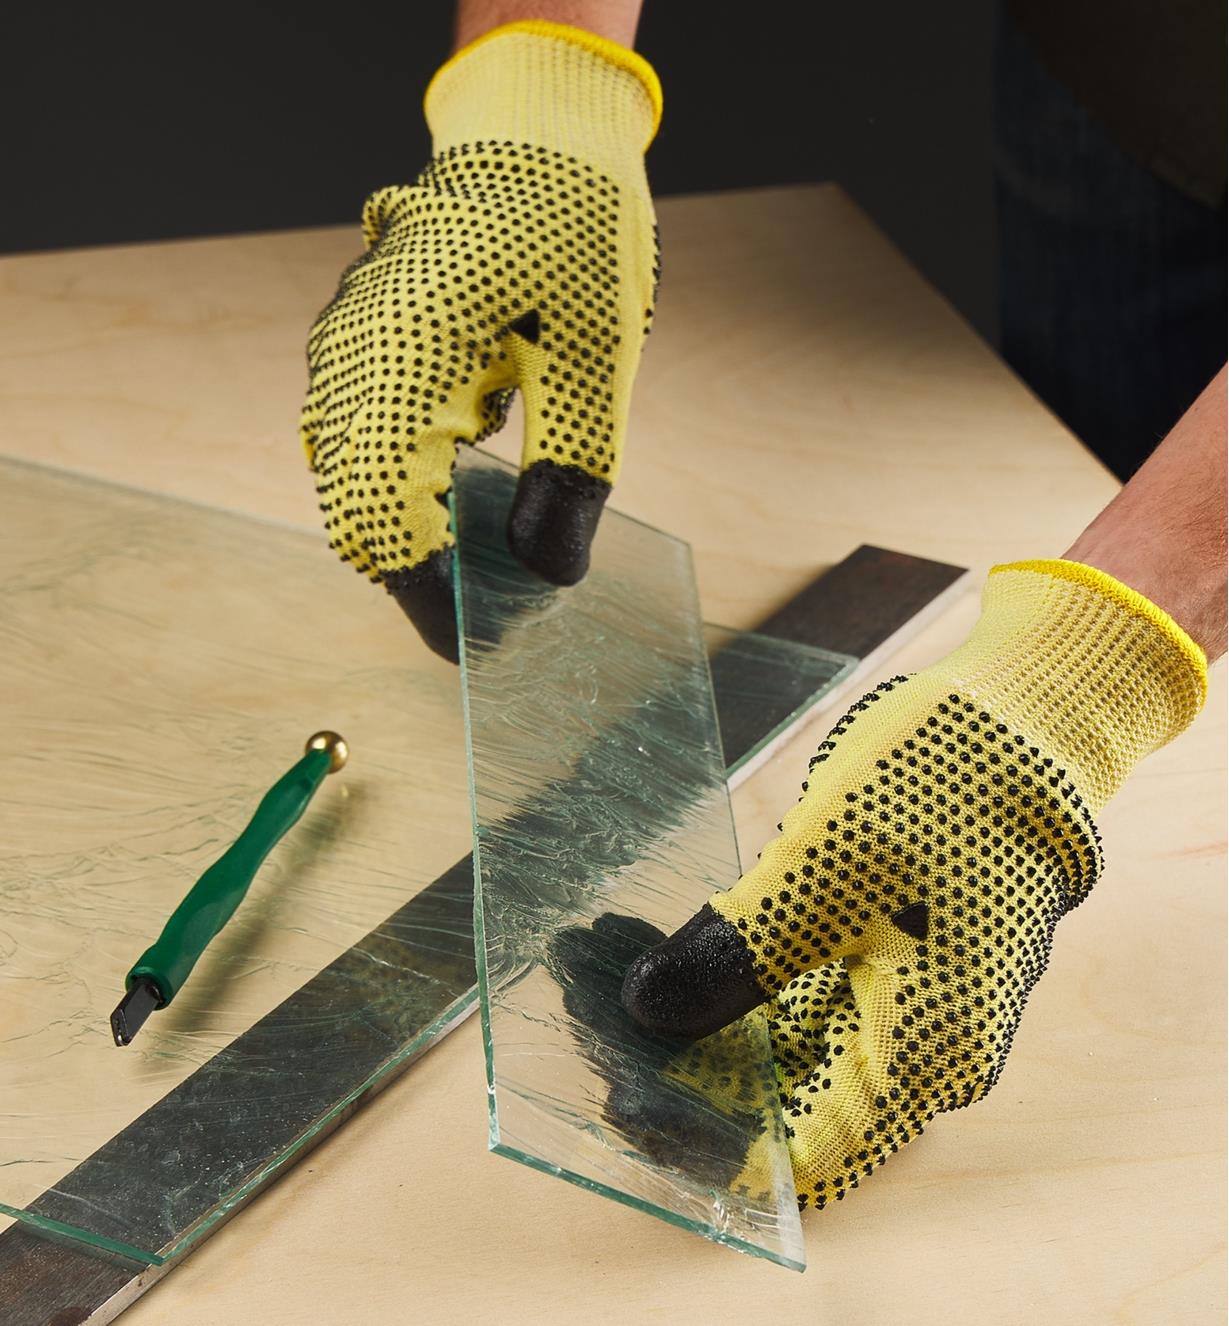 Holding a piece of cut glass while wearing cut-resistant gloves